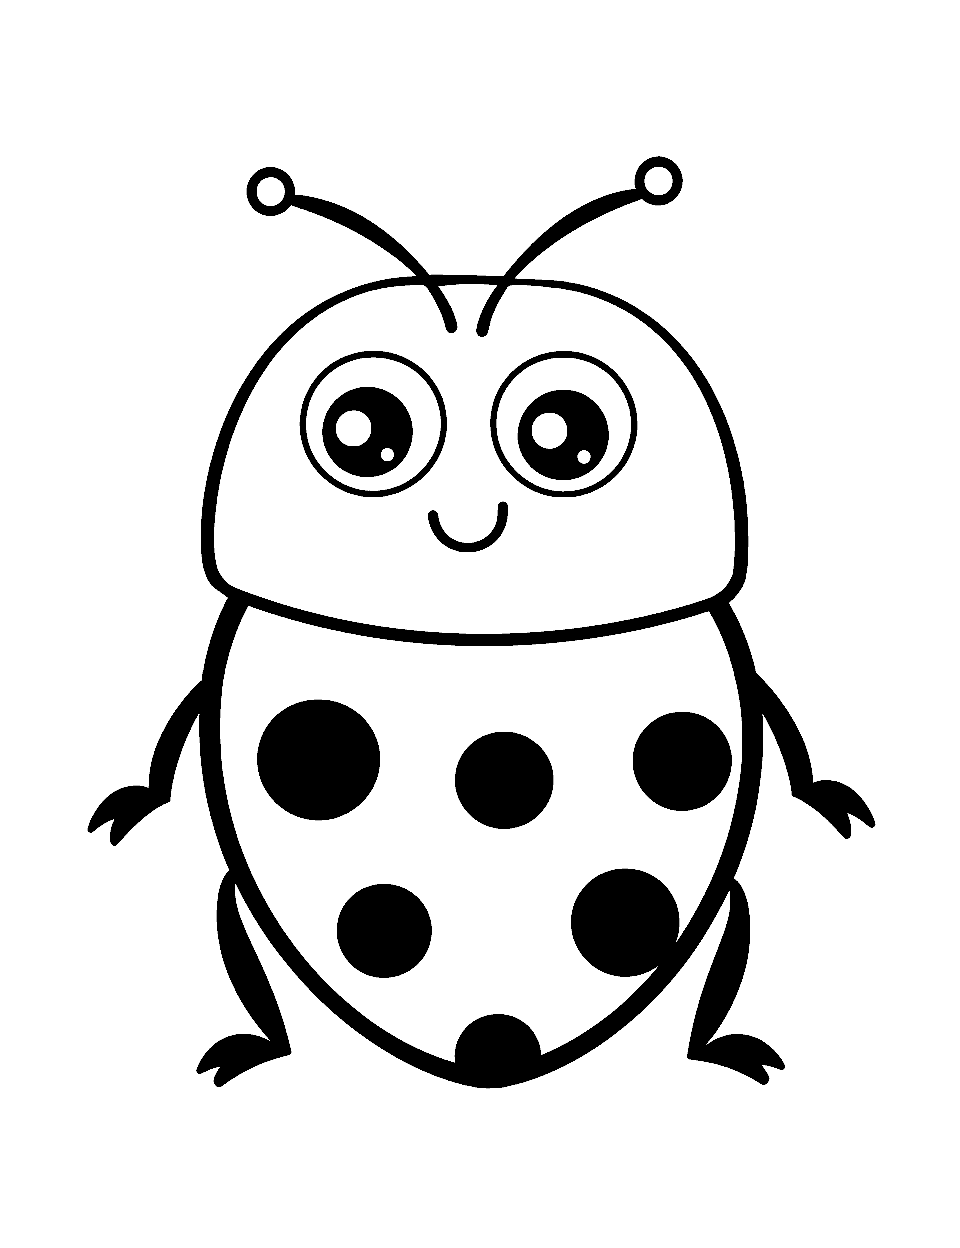 Easy Ladybug for Beginners Coloring Page - A simple, cartoon-style ladybug with large, friendly eyes.